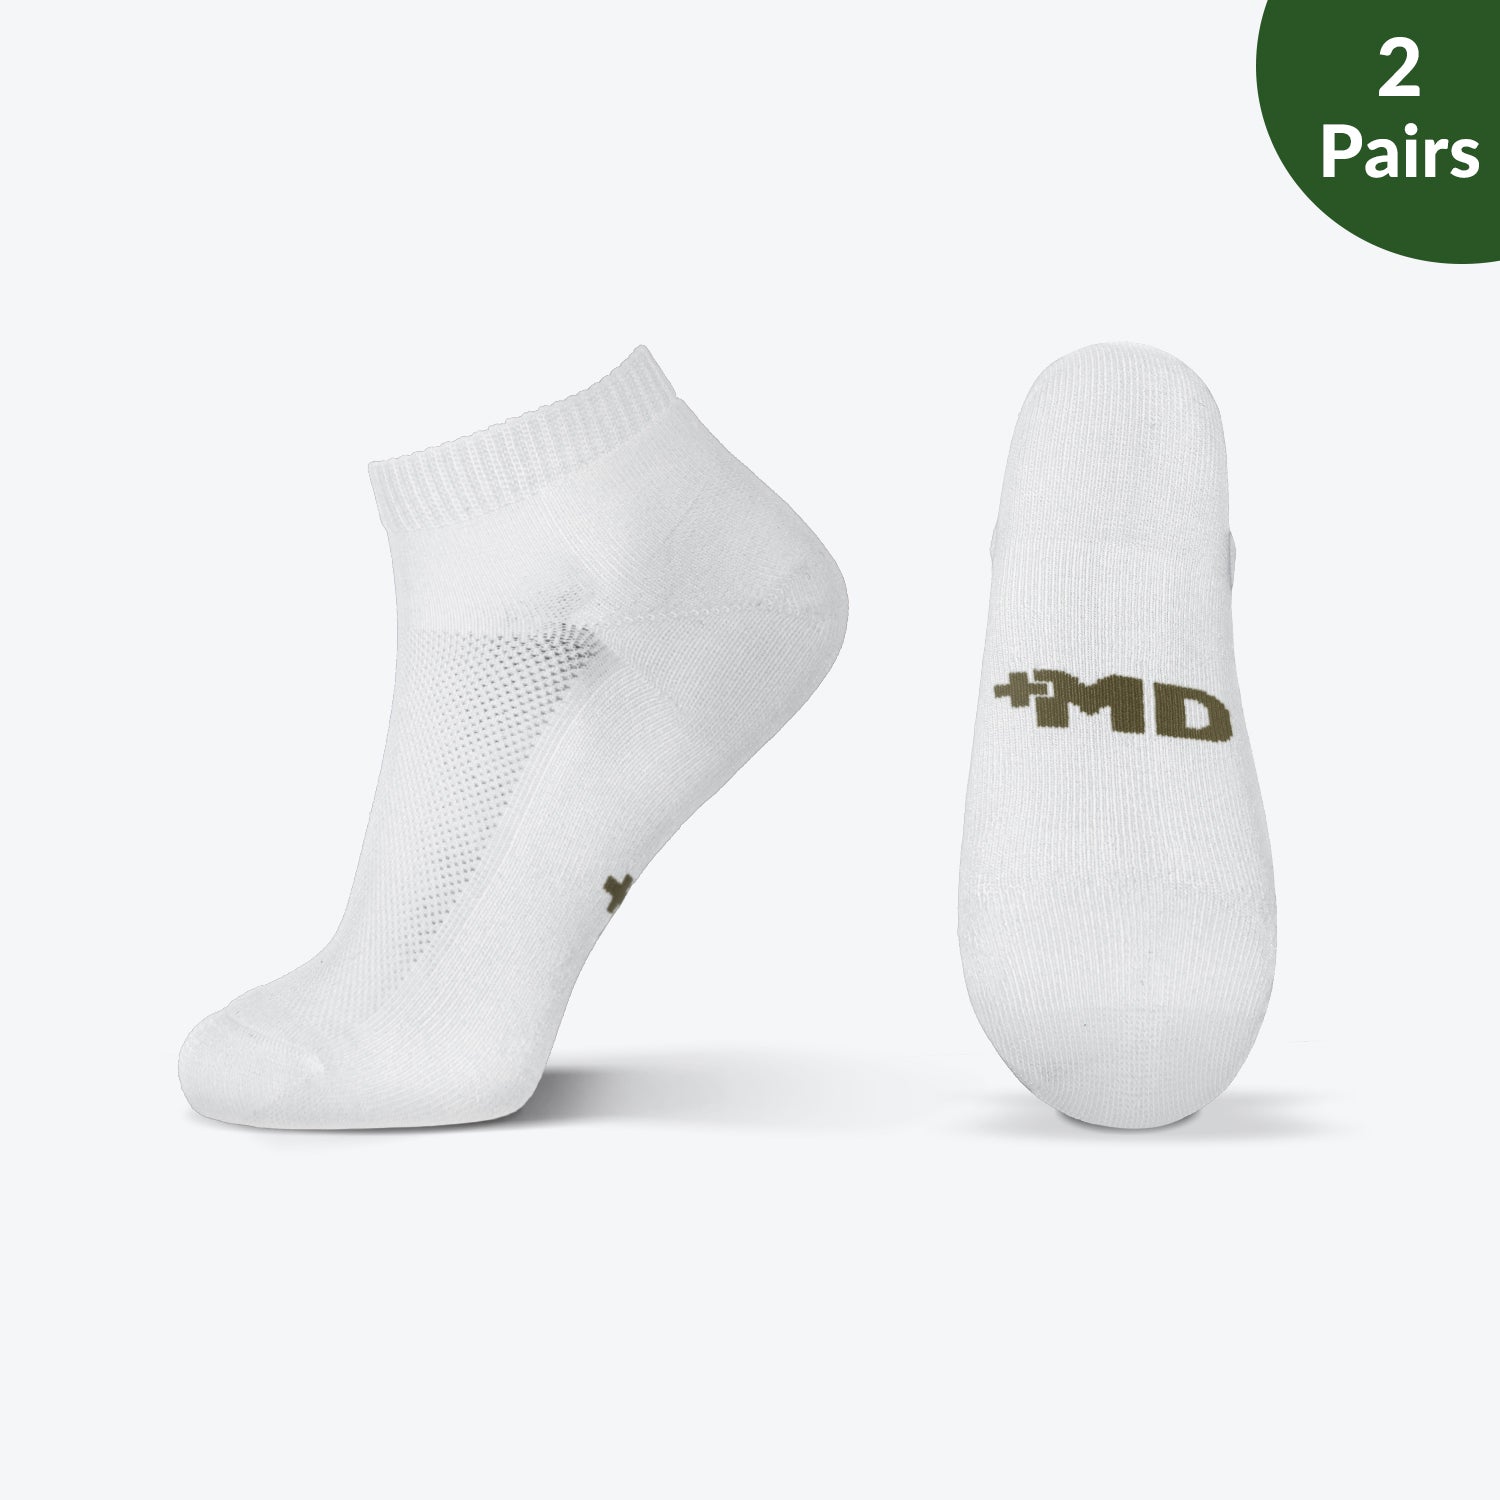 Unisex Premium Ultra Soft Bamboo Socks, 2 Pairs - Free-Shipping For Try